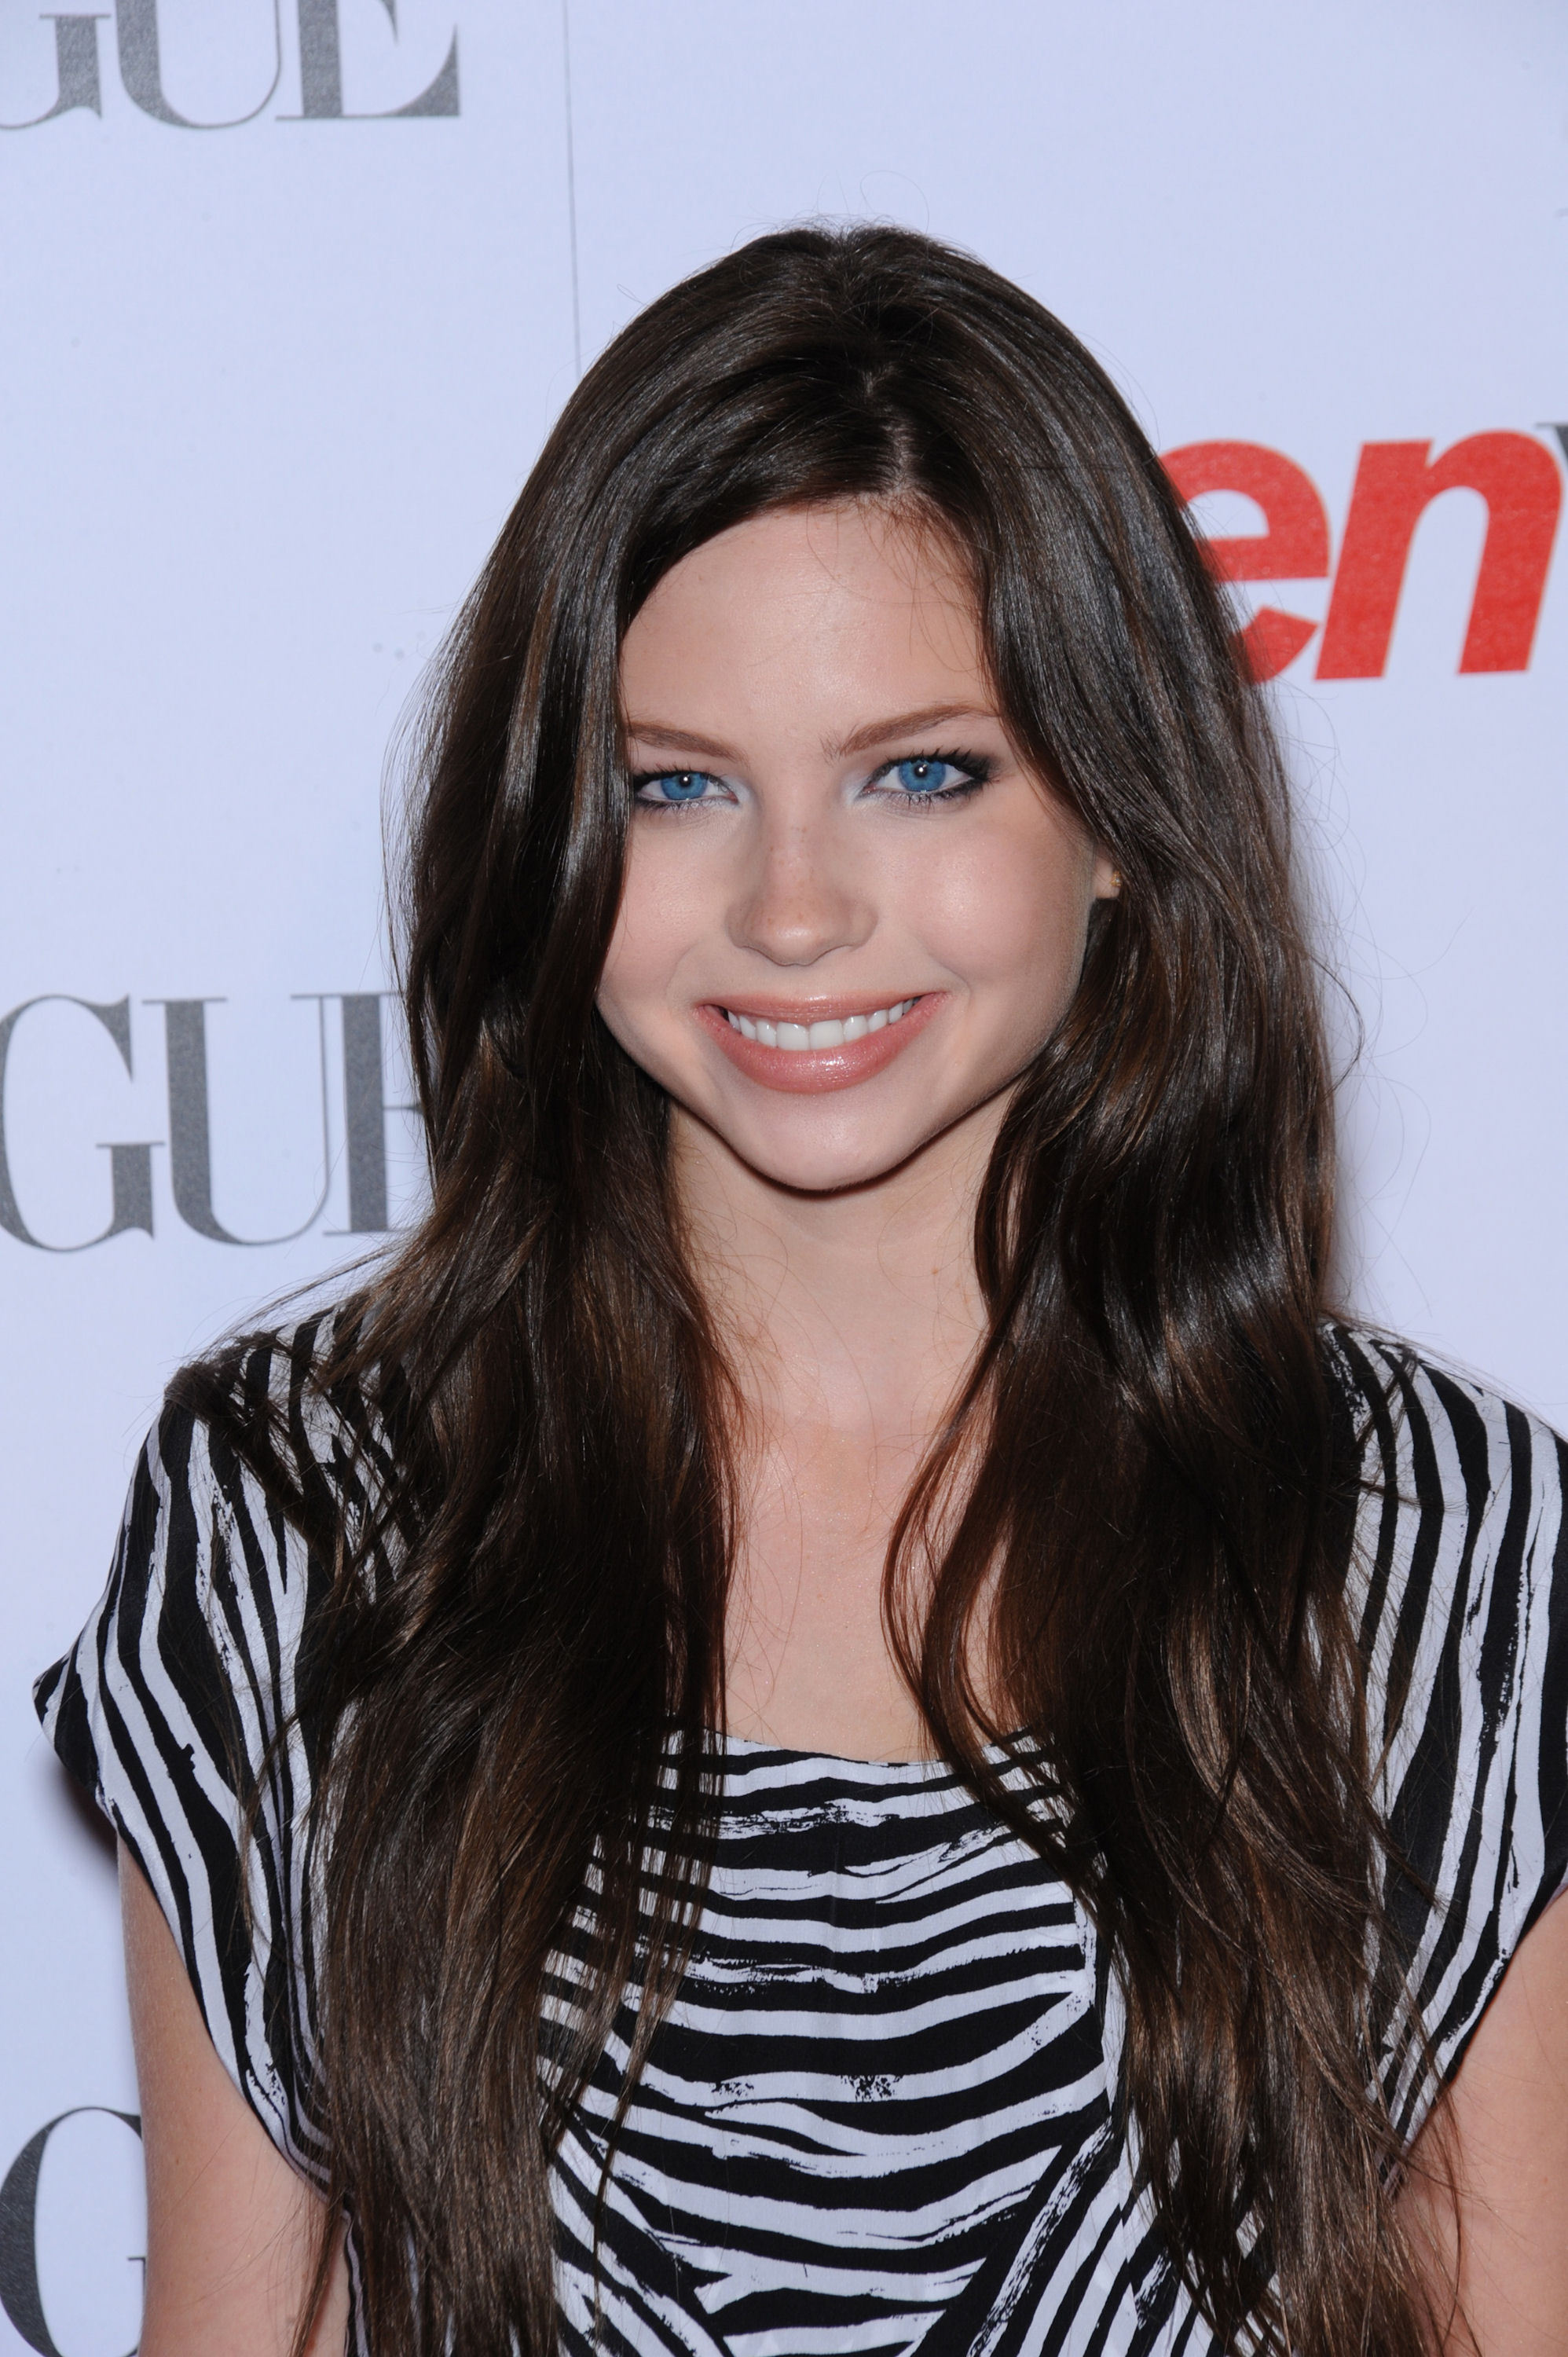 Poze Daveigh Chase - Actor - Poza 5 din 105 - CineMagia.ro.